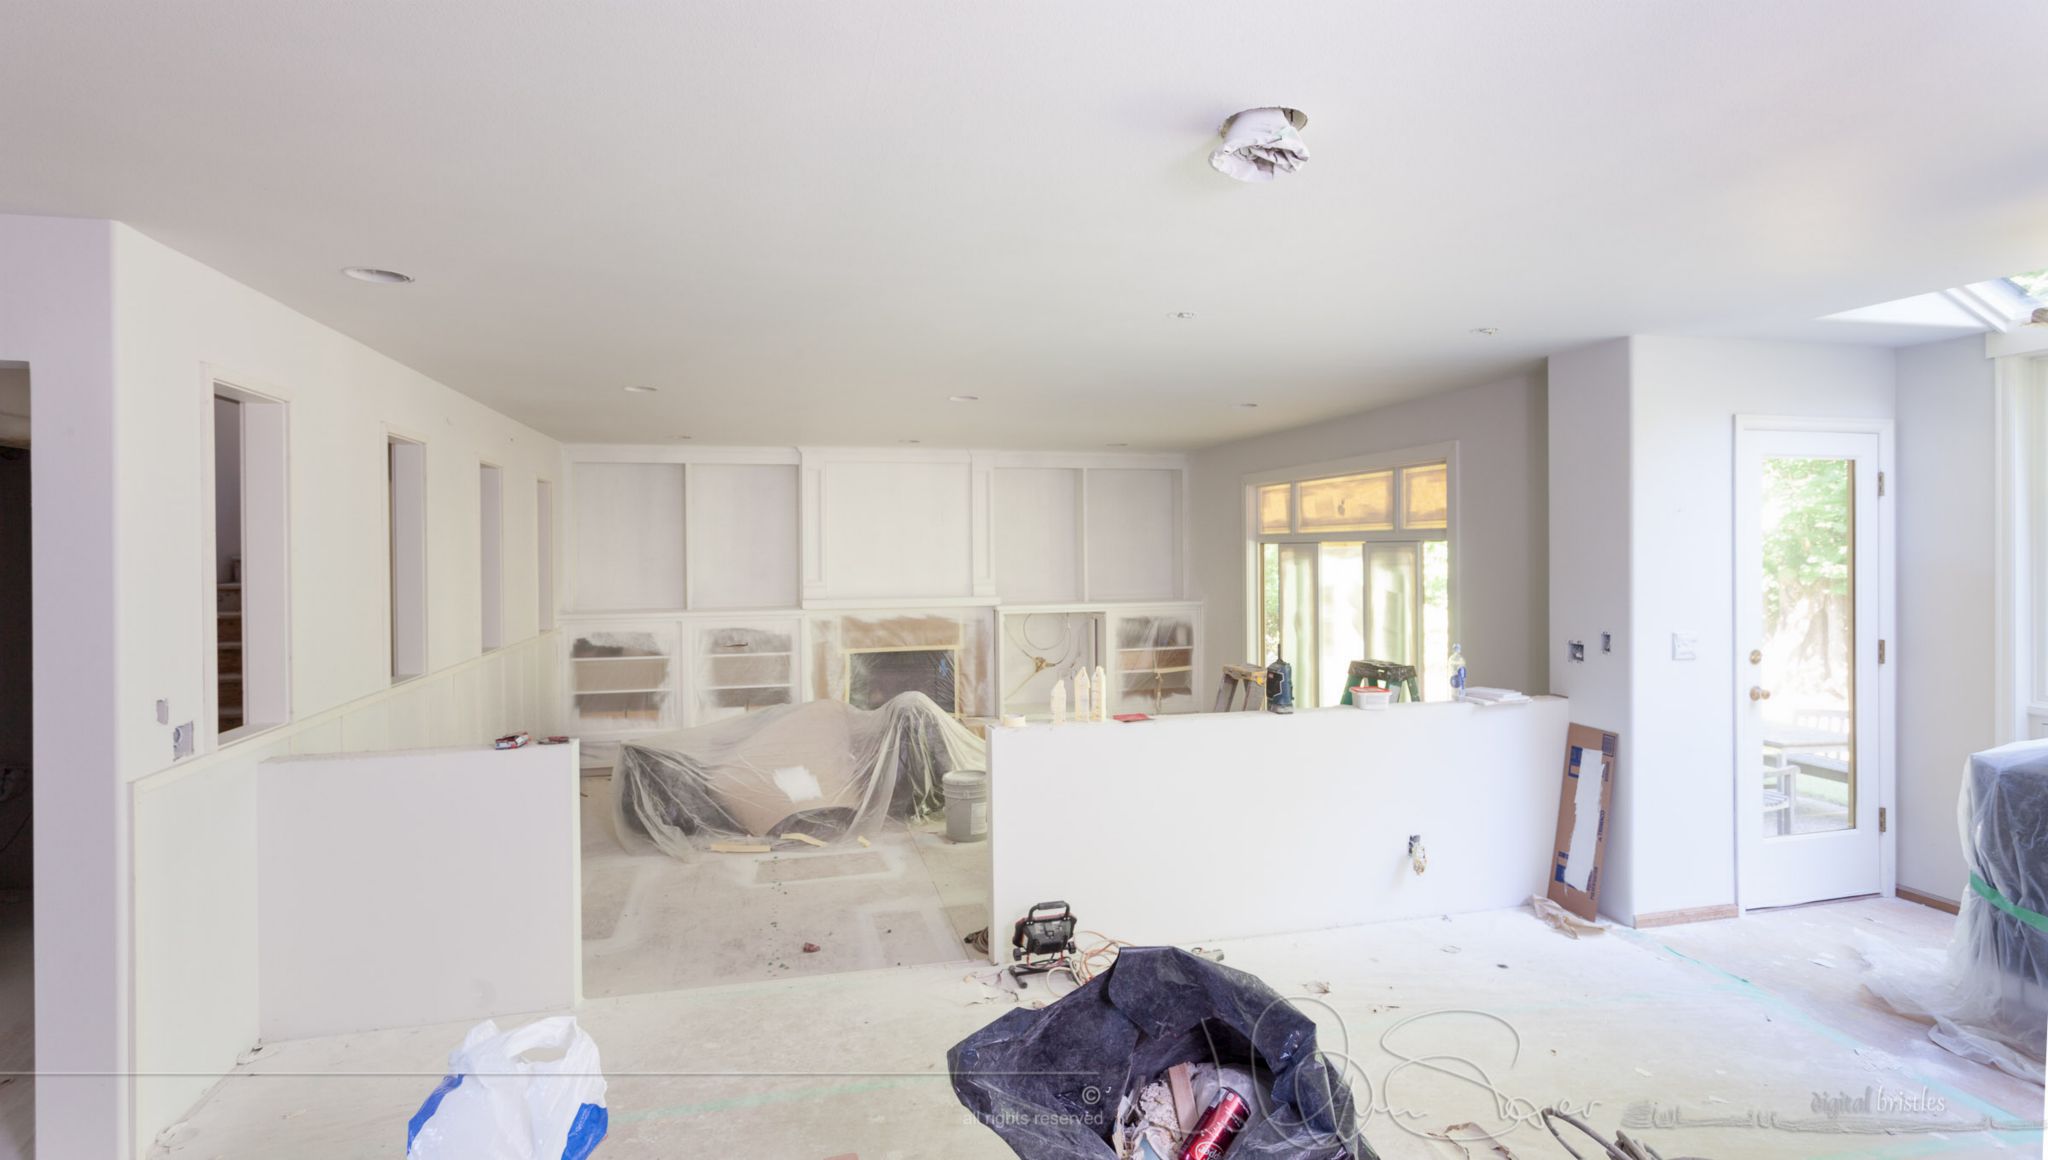 Looking from the kitchen to family room